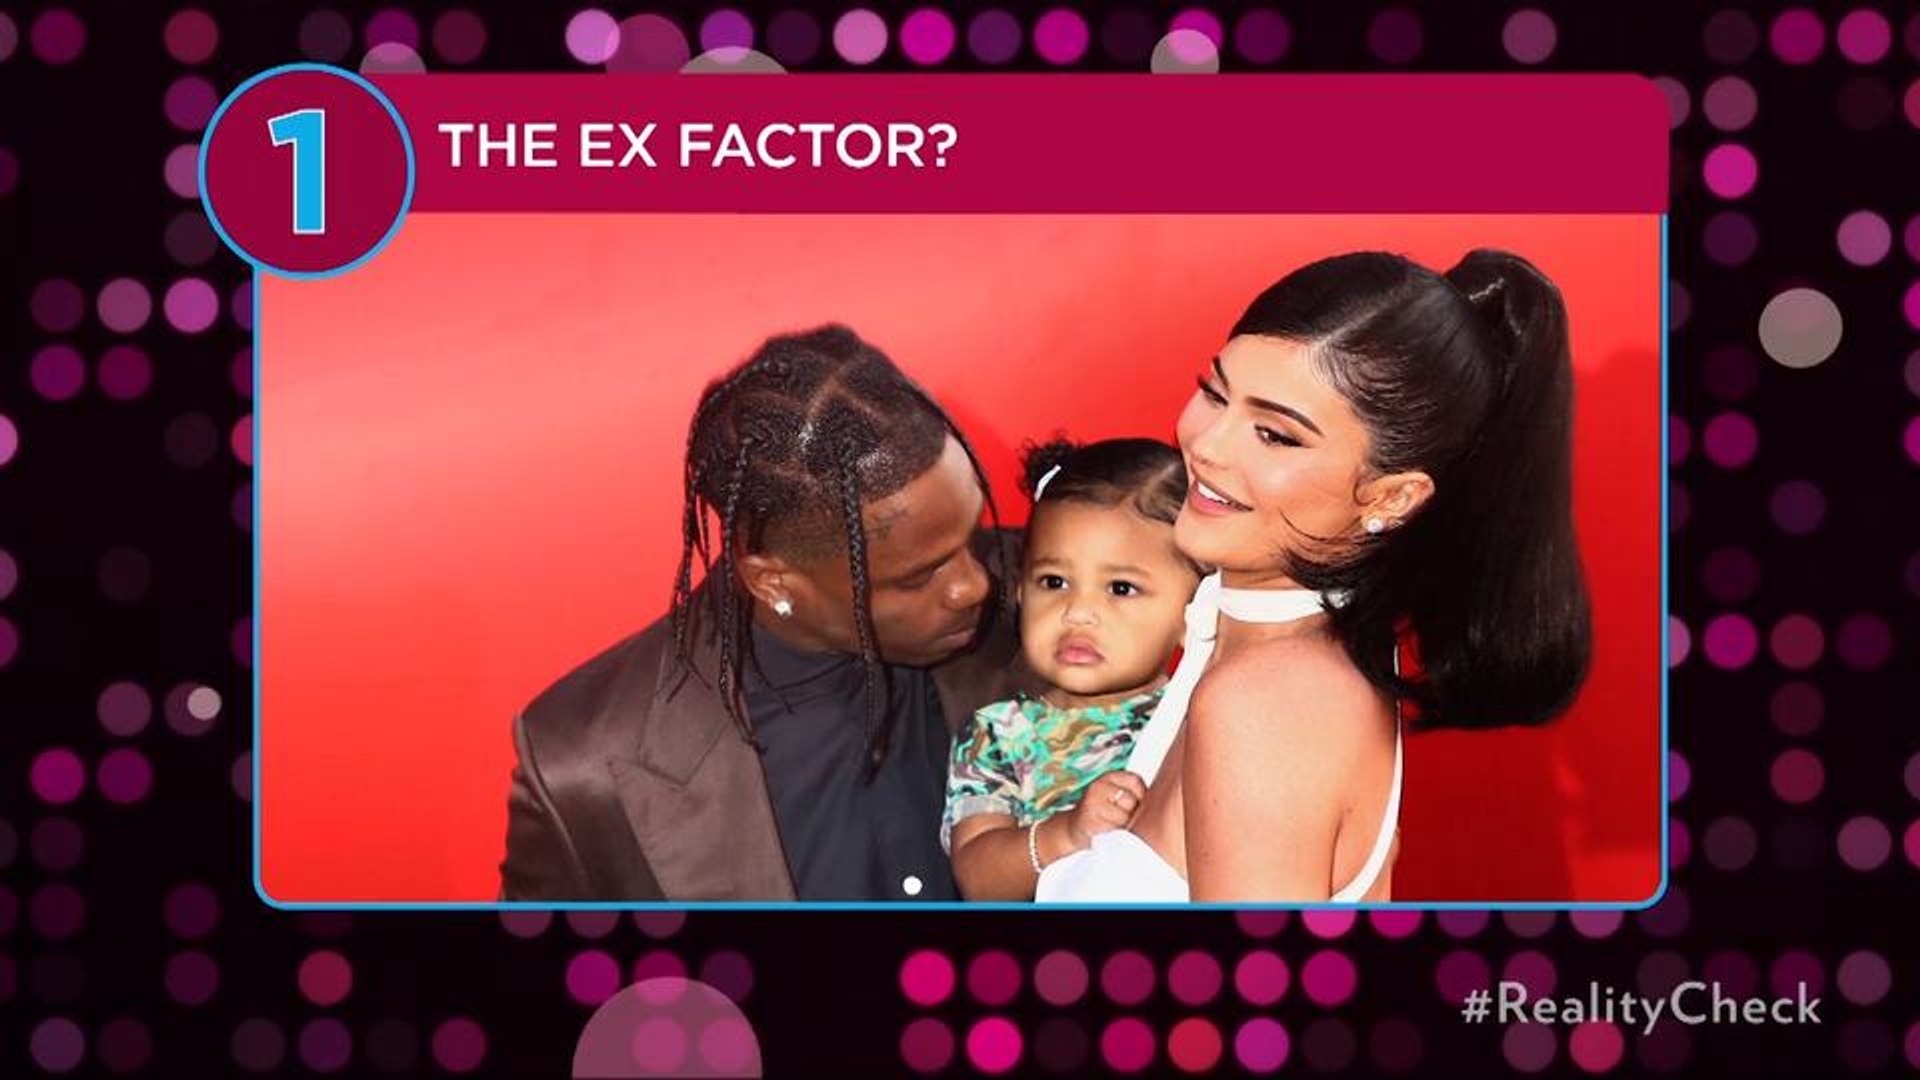 Kylie Jenner 'Wanted a Second Baby' but 'Had Trust Issues' Ahead of Travis Scott